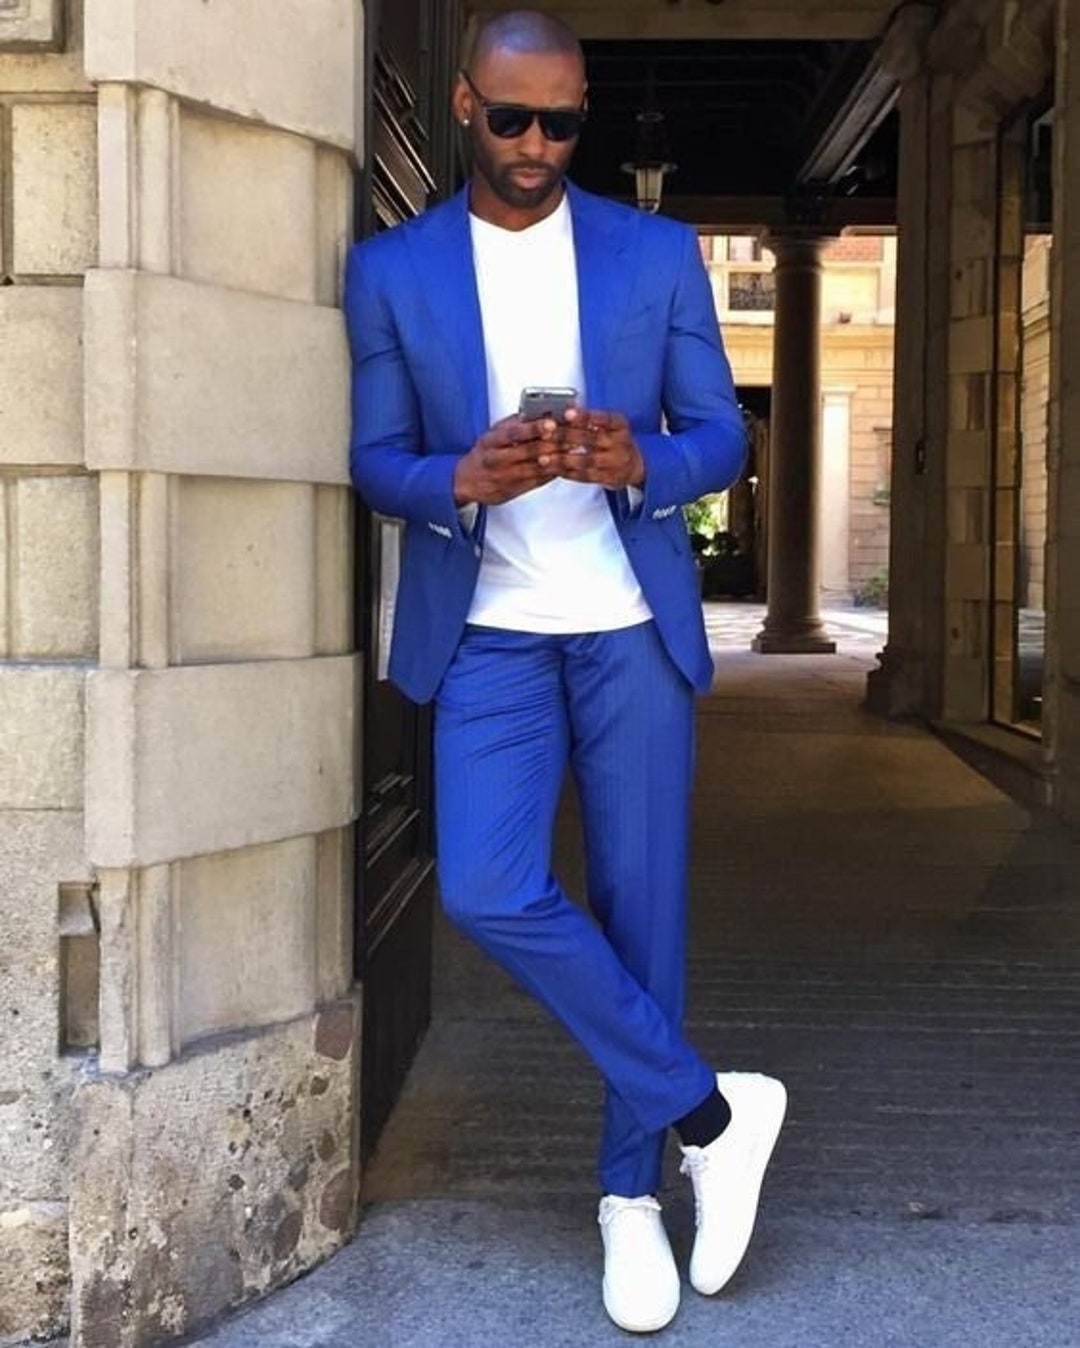 Suits and sneakers #suits #mensstyle #white #shoes #basket #sneakers #blue  #navy #costume #streetsty… | Suits and sneakers, Double breasted suit men, Blue  suit men